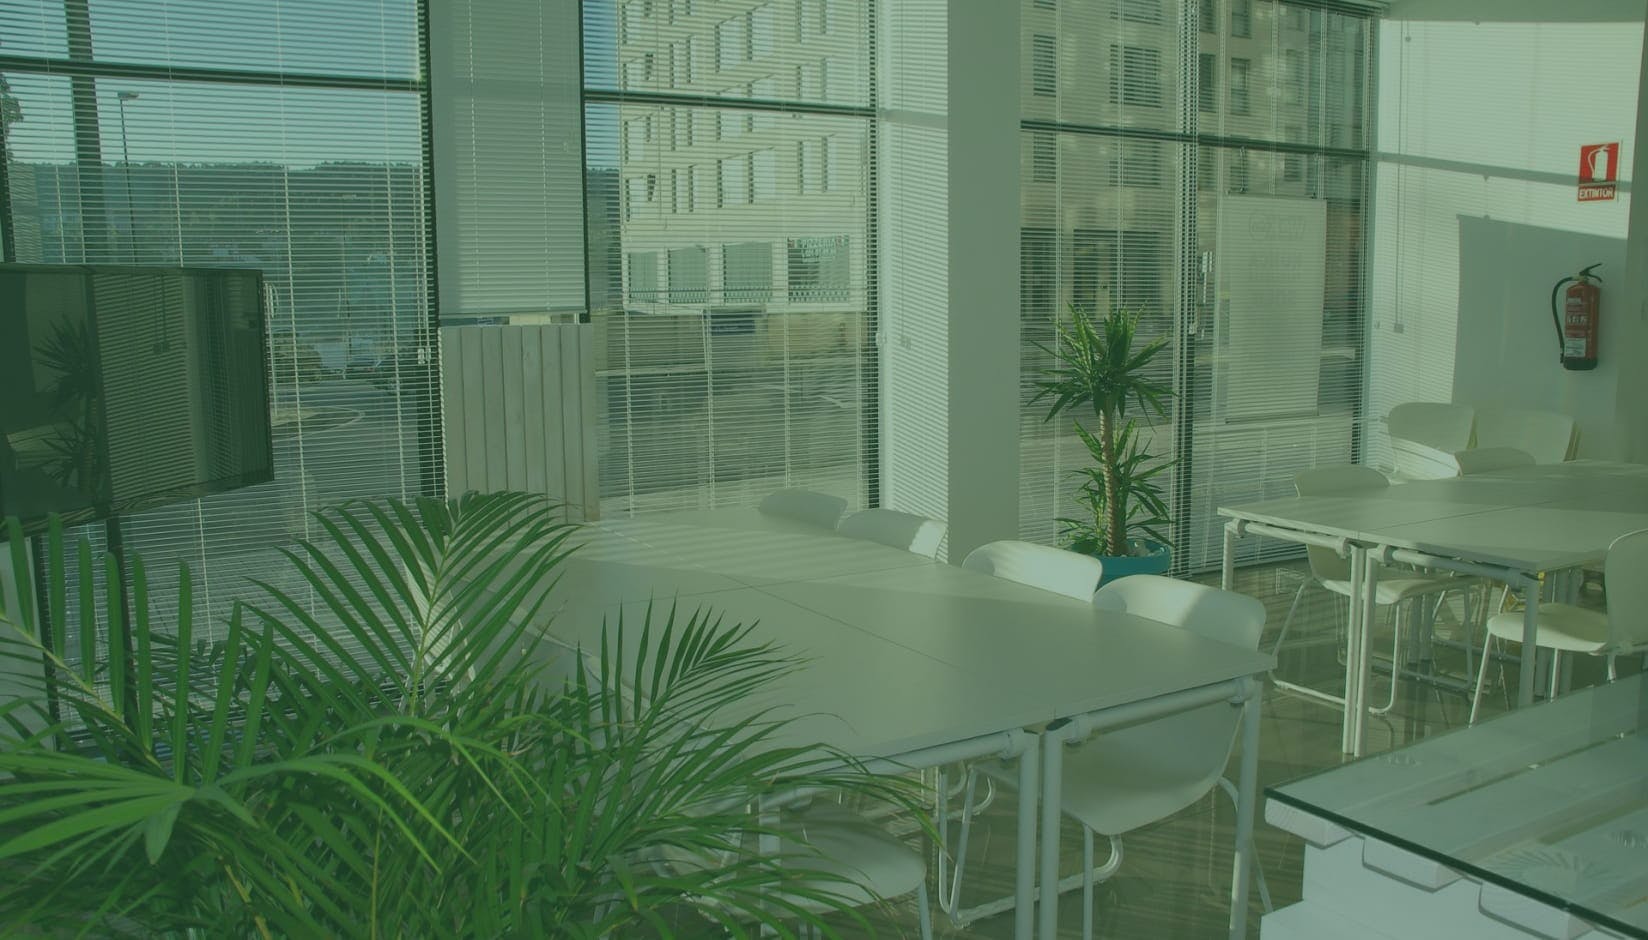 Coworking Spaces That Will Move People: 7 Reasons for Love